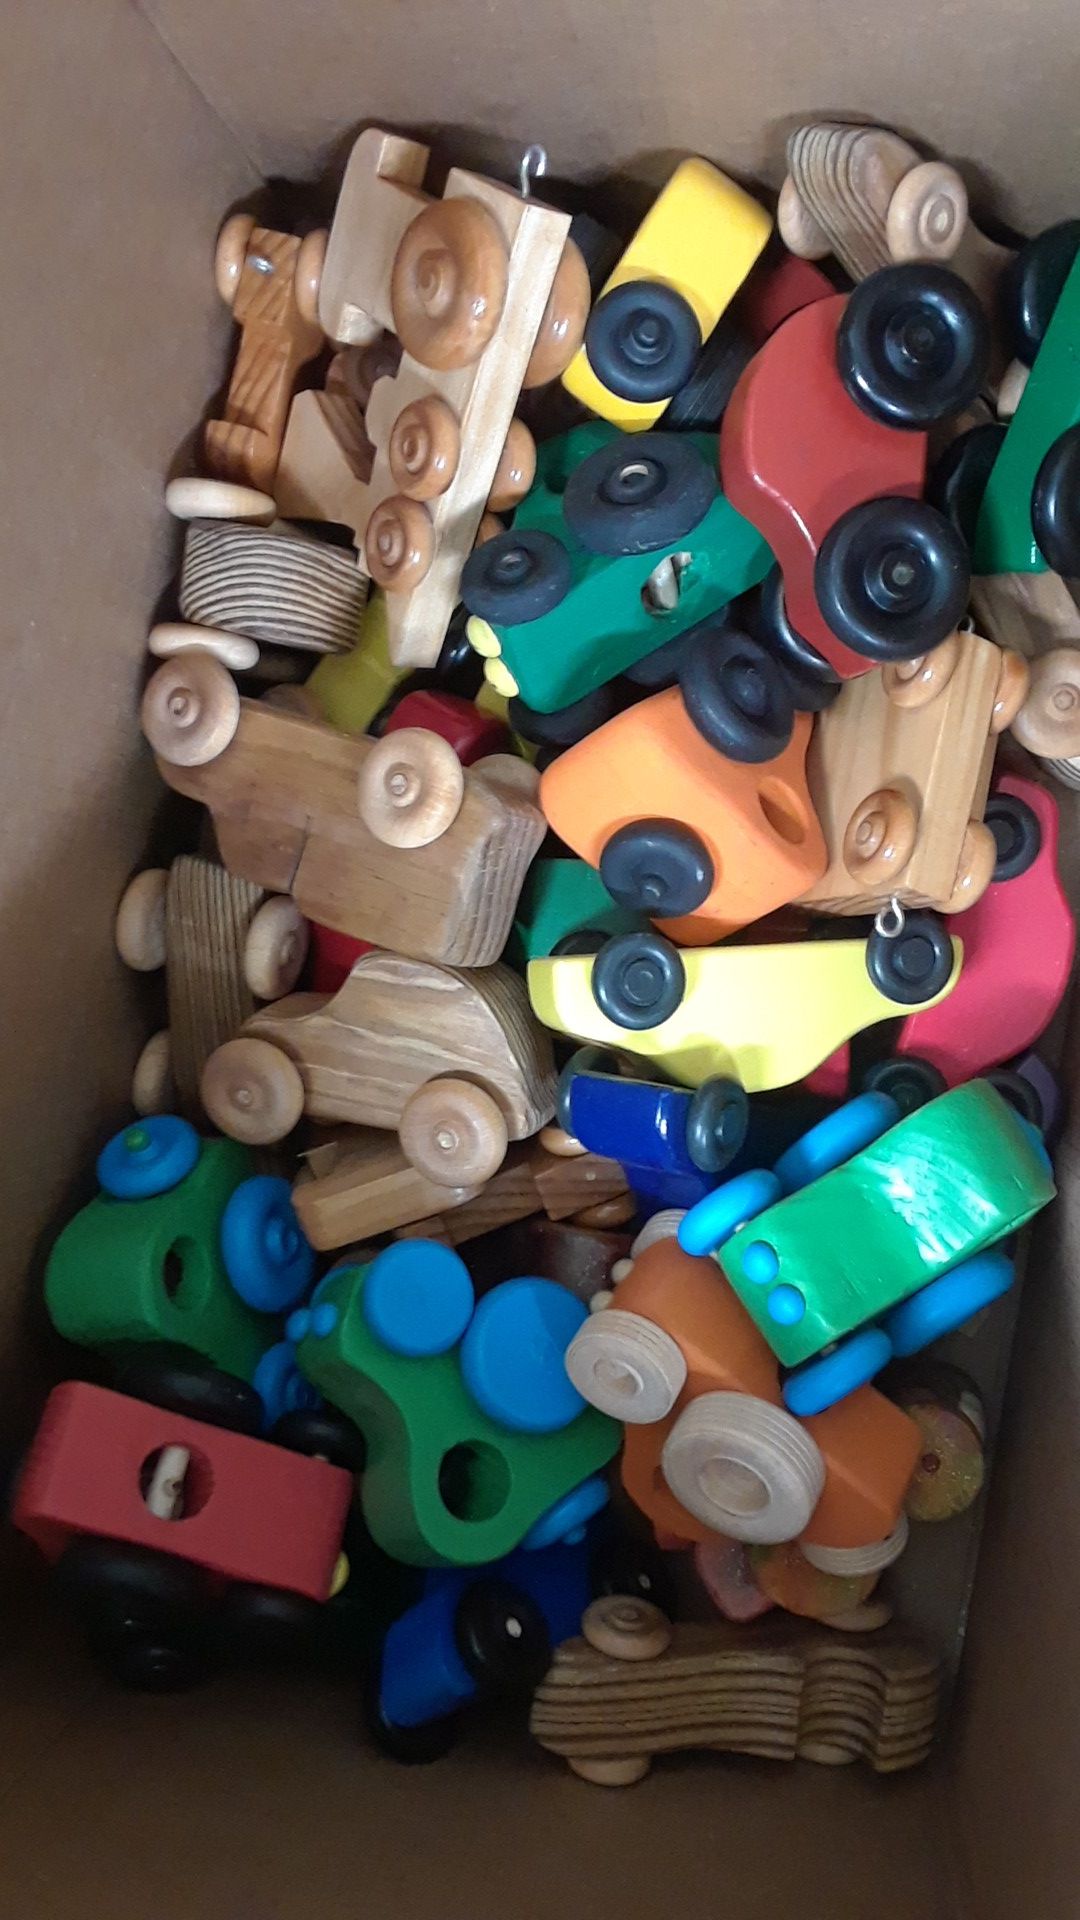 Wooden toy cars for kids $3 EACH